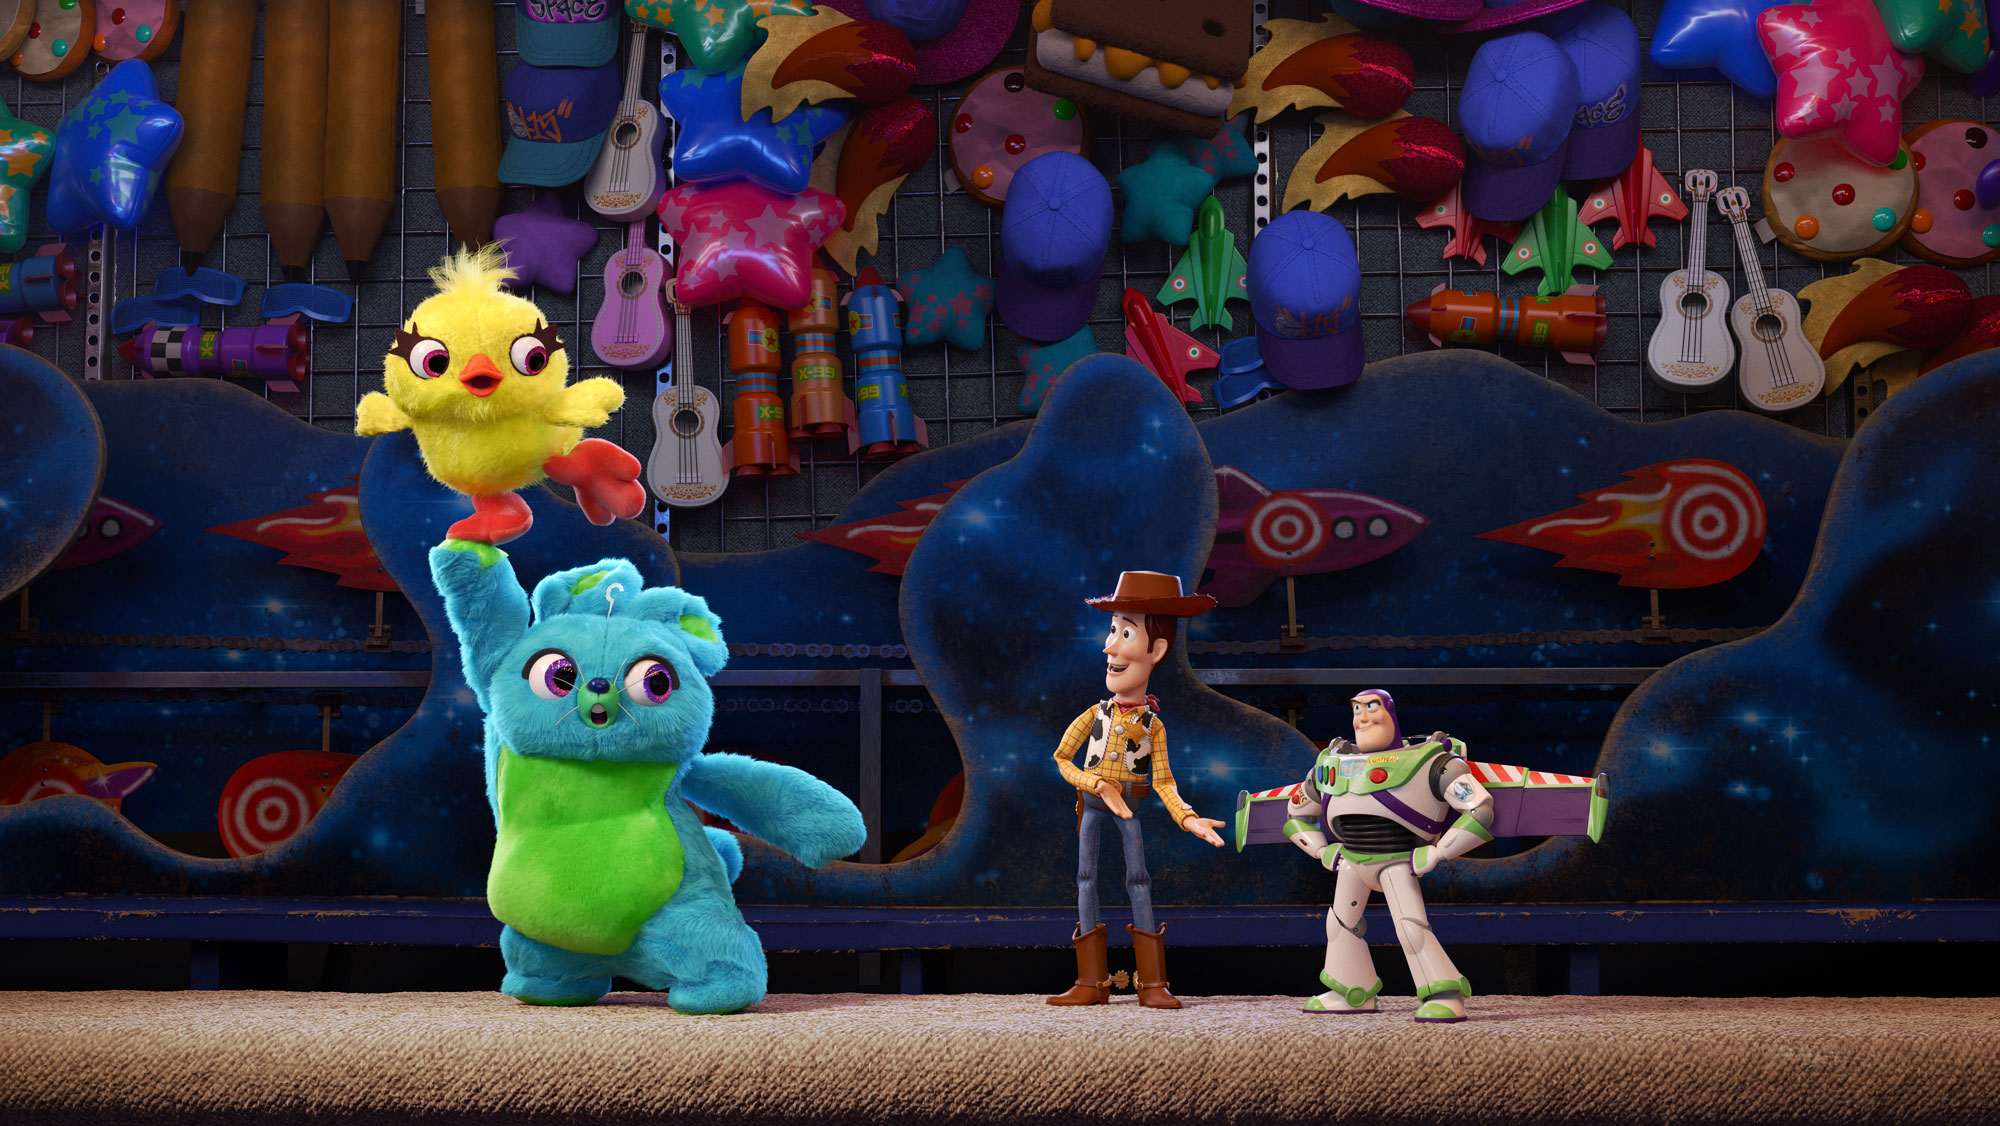 Pixar to Pursue All Original Storylines and Films After Release of “Toy Story 4”